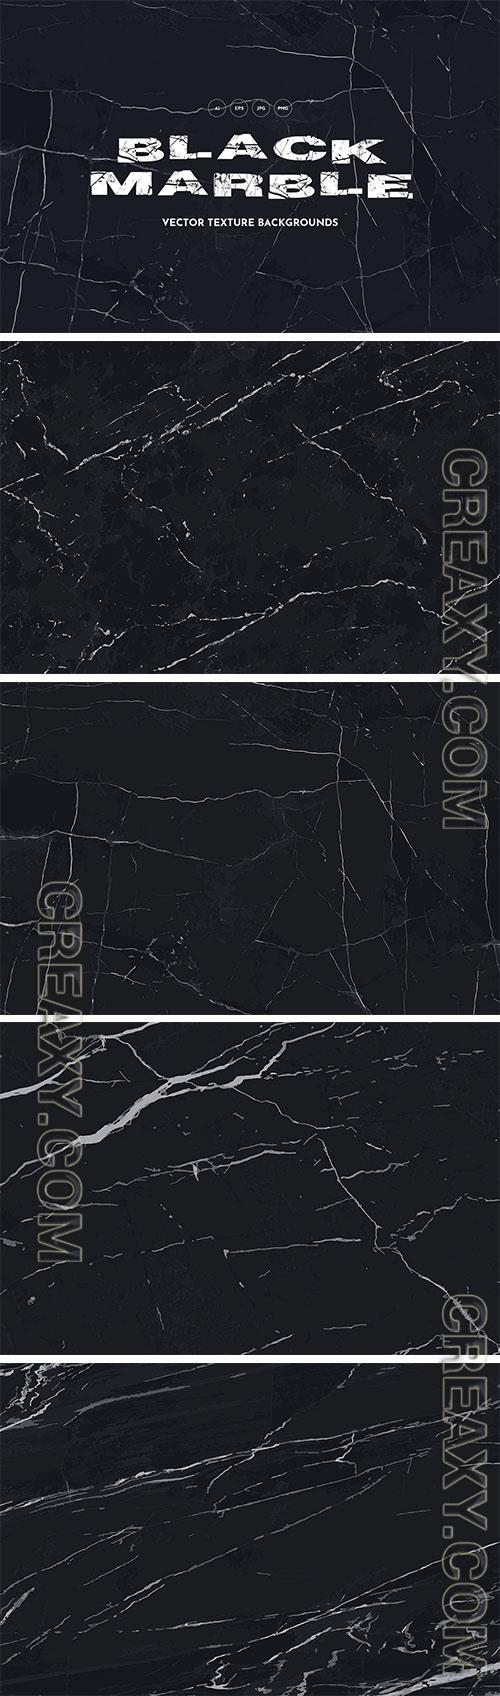 Black Marble Vector Texture Backgrounds